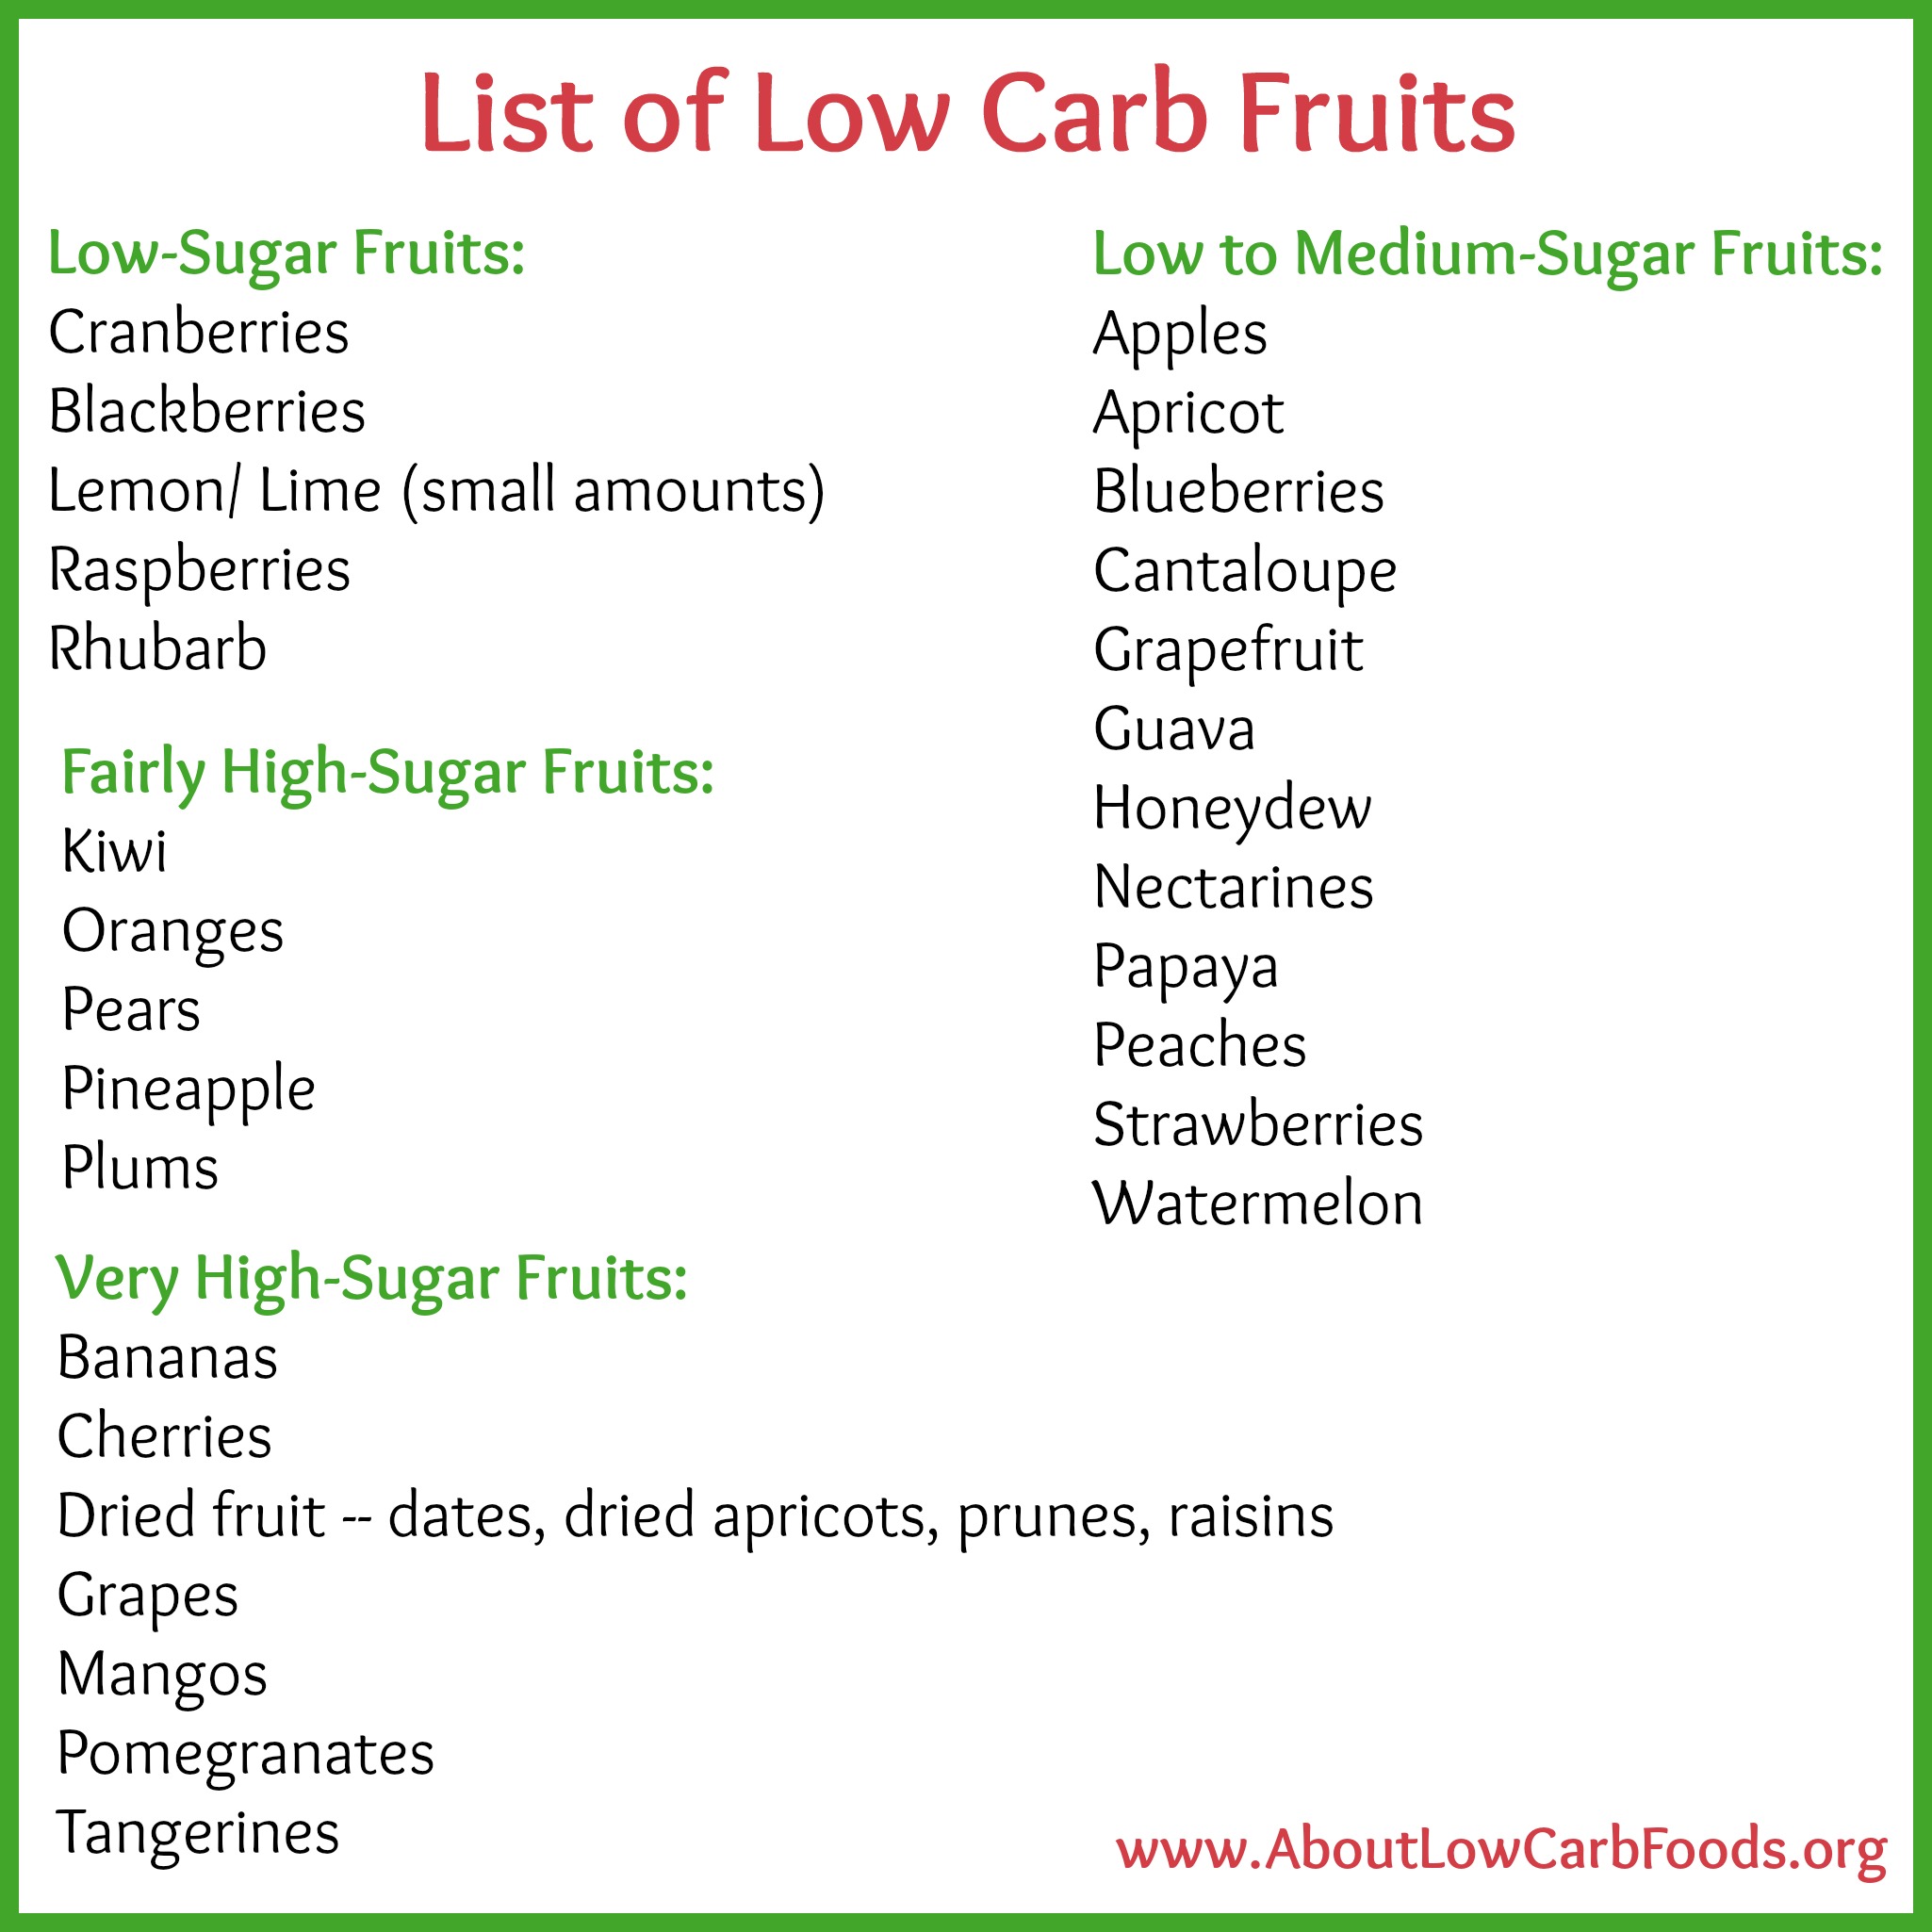 Are Fruits Allowed on Low Carb Diet? Sometimes... - About ...